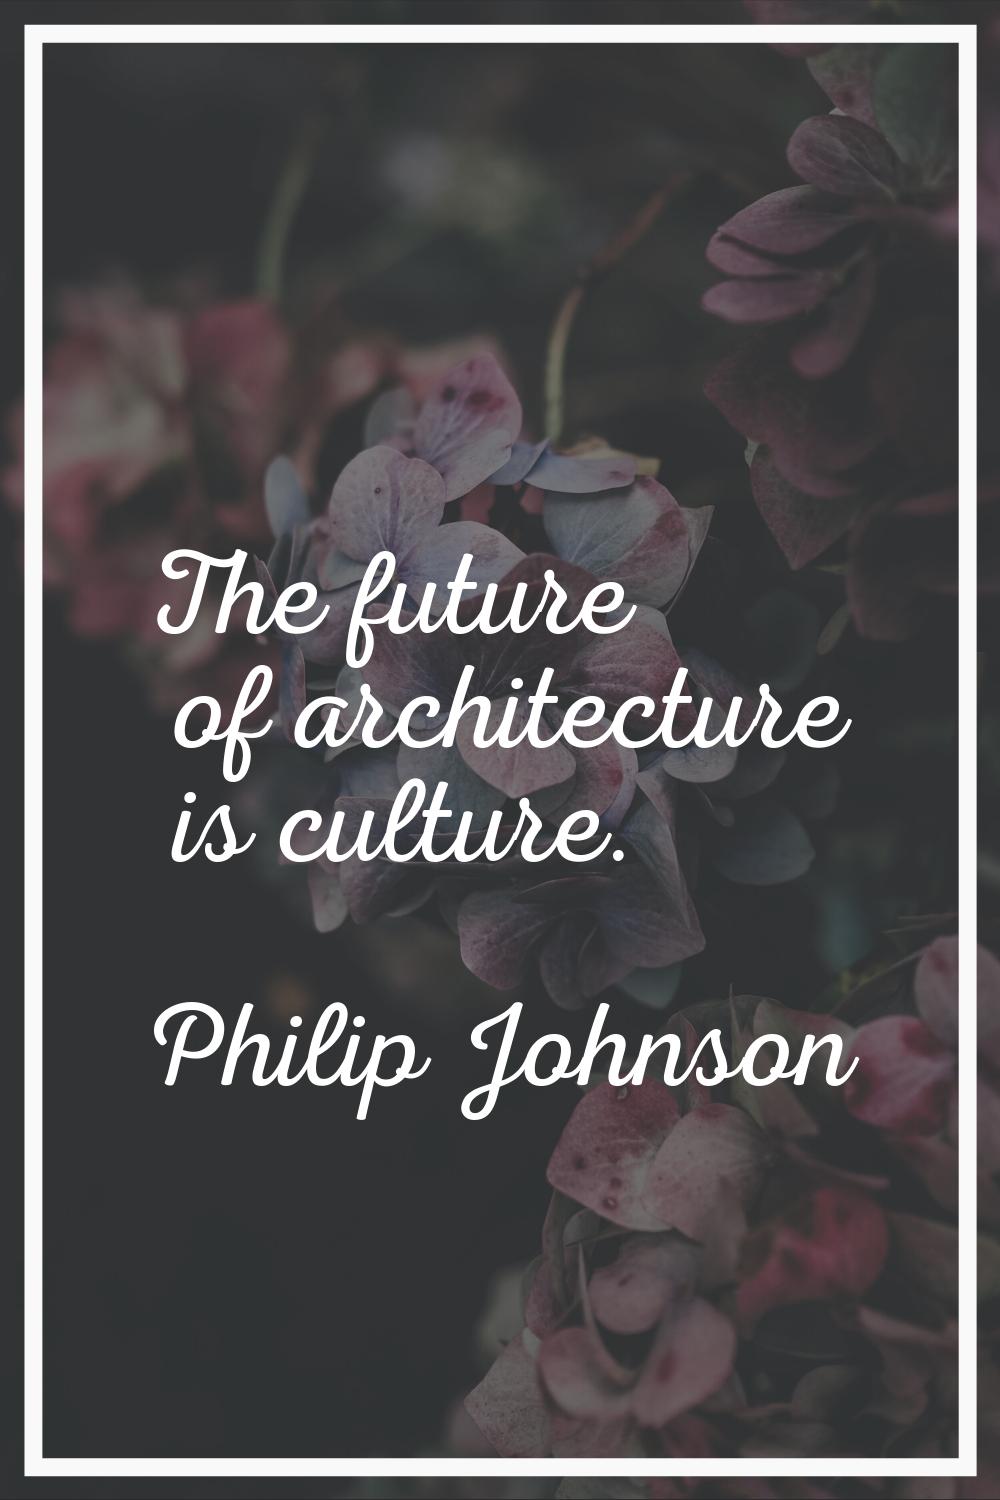 The future of architecture is culture.